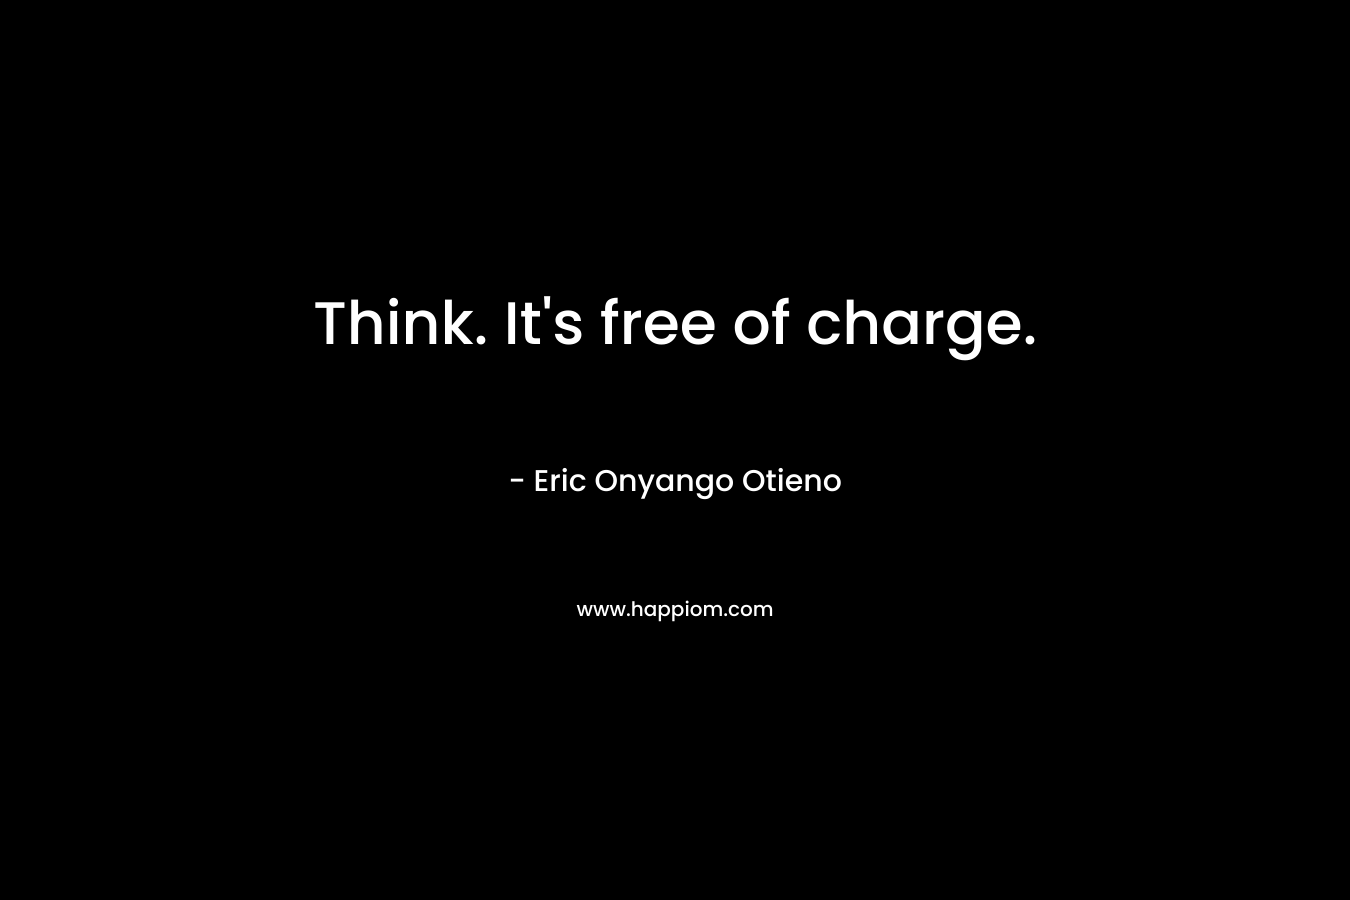 Think. It's free of charge.